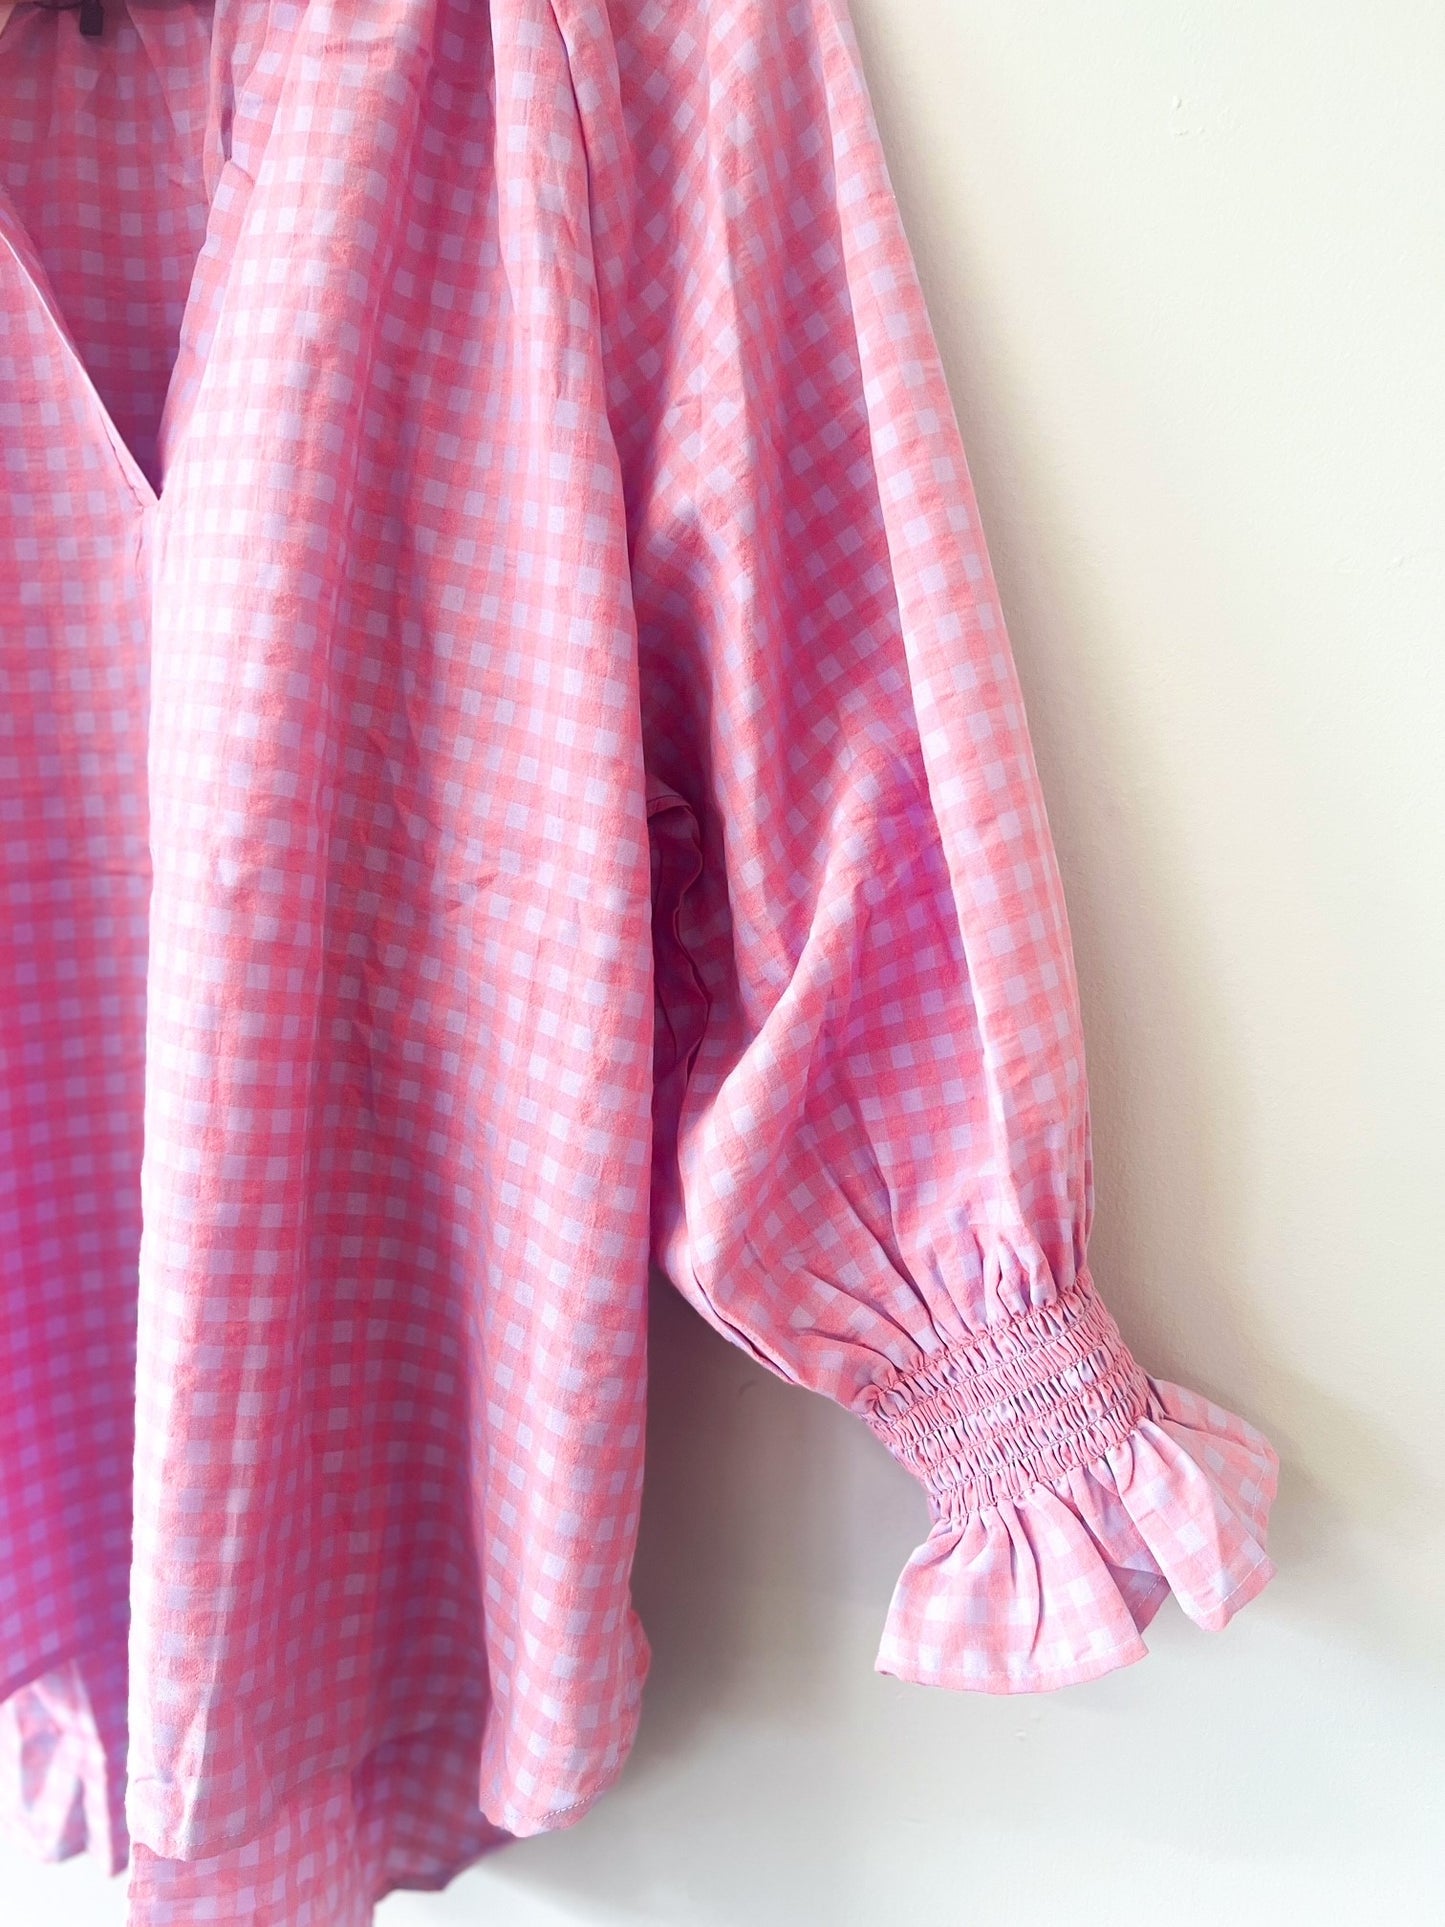 Relaxed Gingham Top - Pink and Lilac